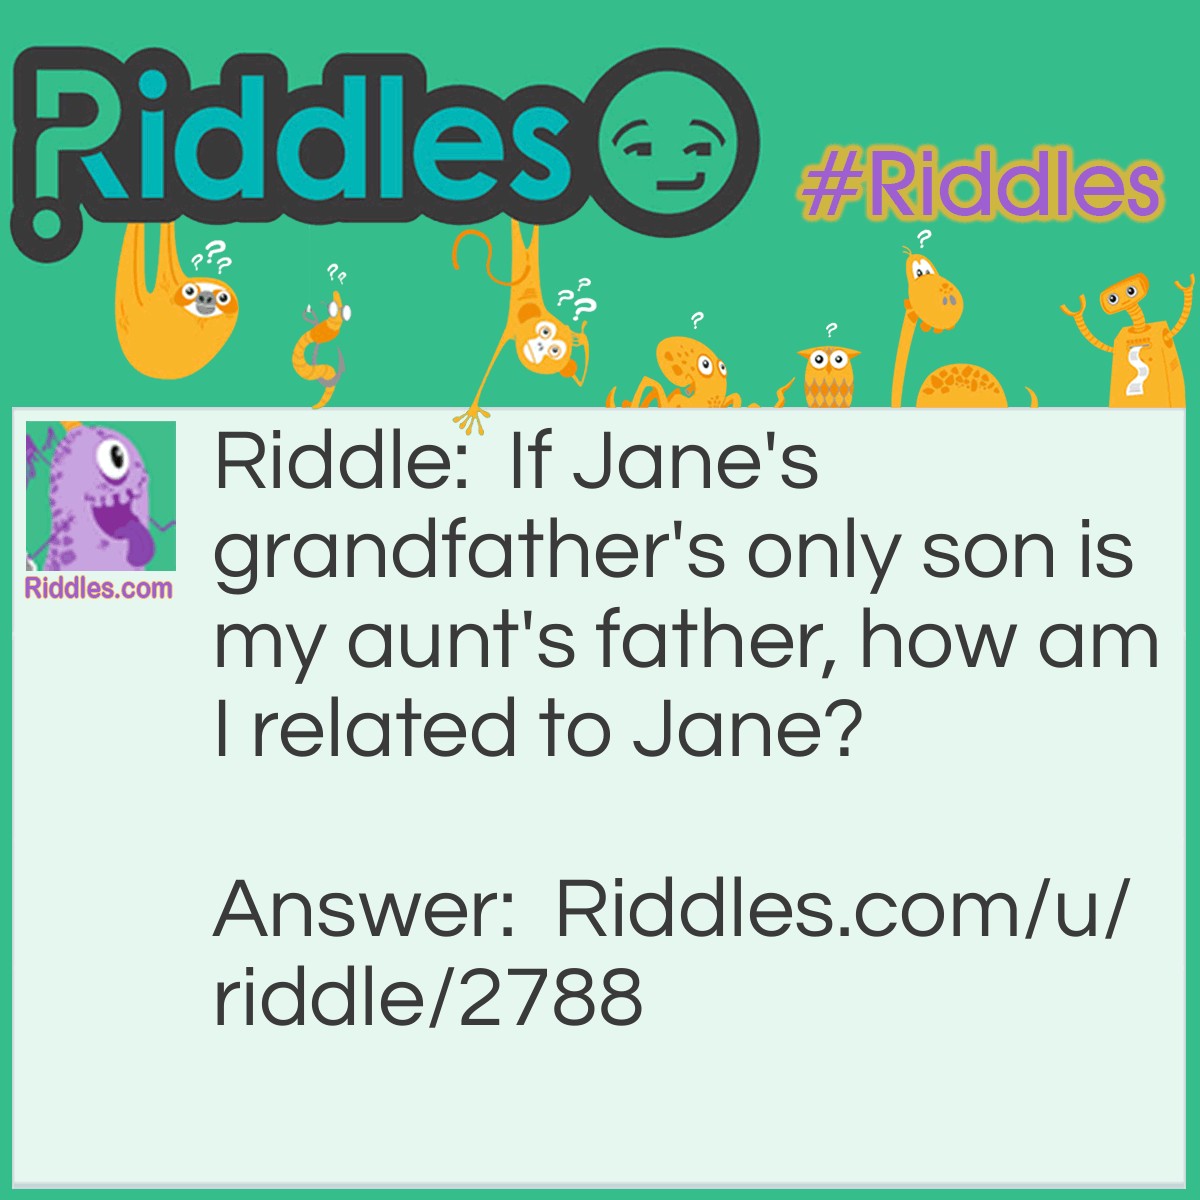 Riddle: If Jane's grandfather's only son is my aunt's father, how am I related to Jane? Answer: I am Jane's niece/nephew.